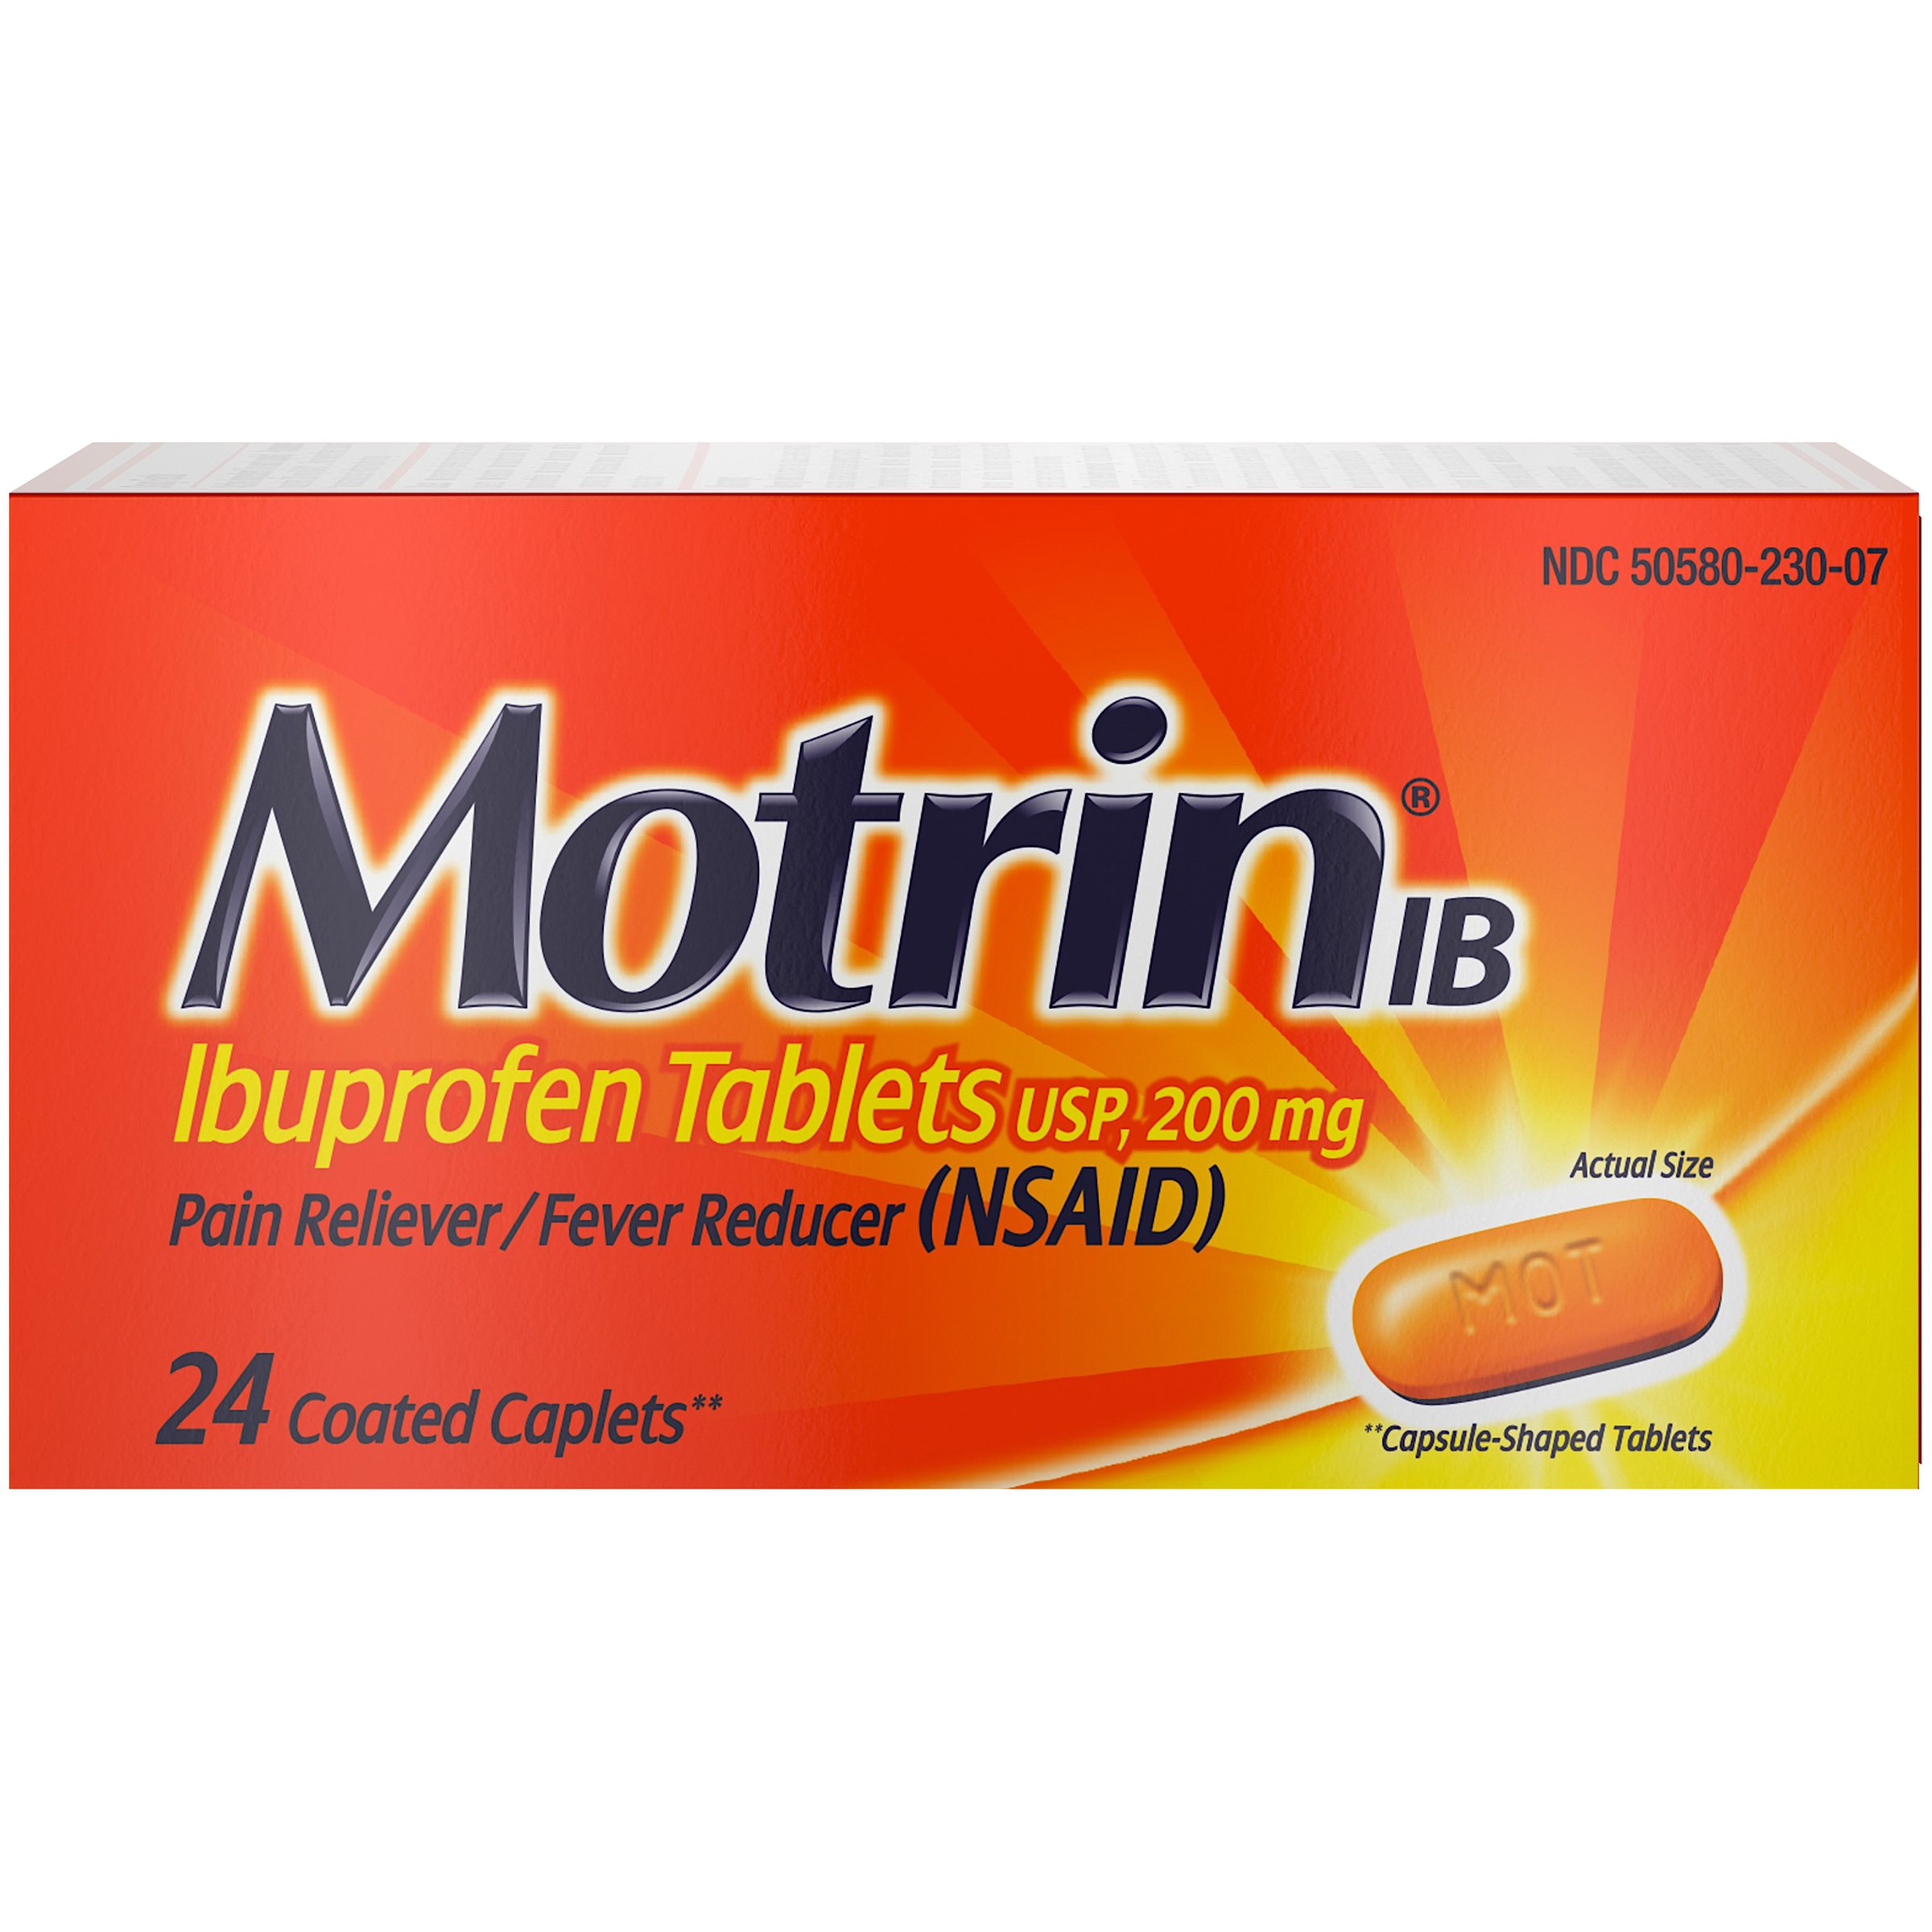 Motrin IB, Ibuprofen, Relief from Minor Aches and Pains ...